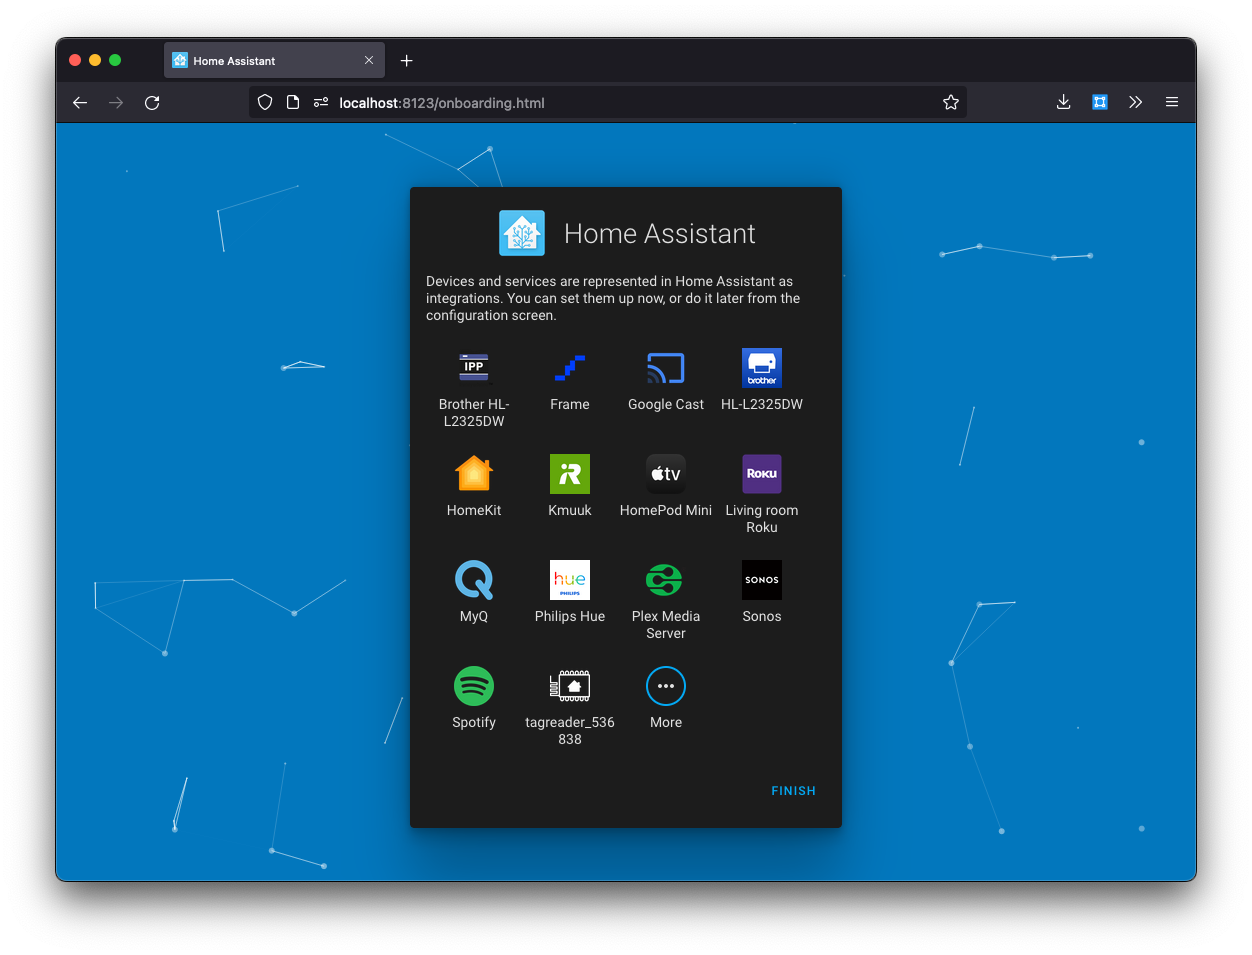 Screenshot of Home Assistant onboarding showing 14 discovered devices and services.